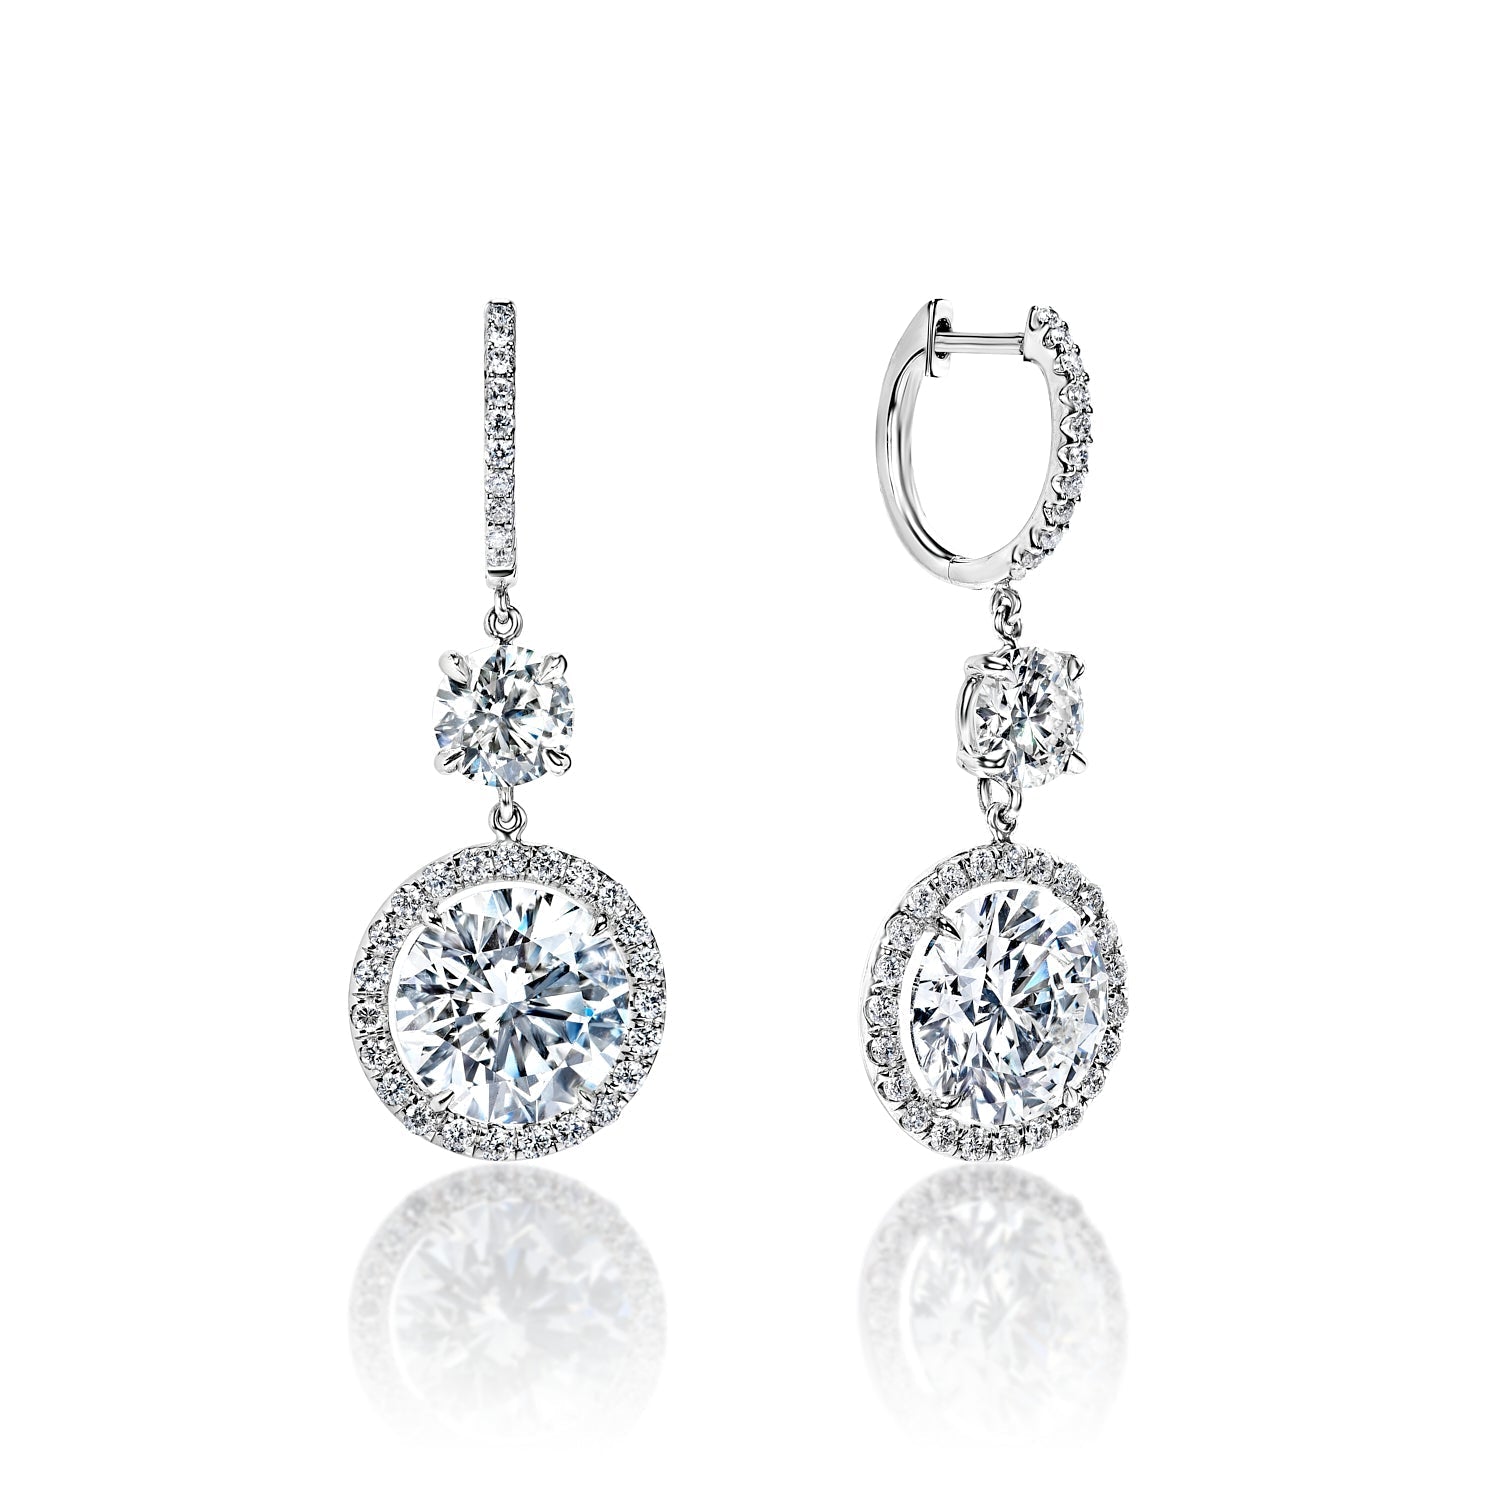 Felicity 13 Carat I J SI1 Round Brilliant Cut Diamond Huggie Dangle Earrings in 18k White Gold Front and Side View